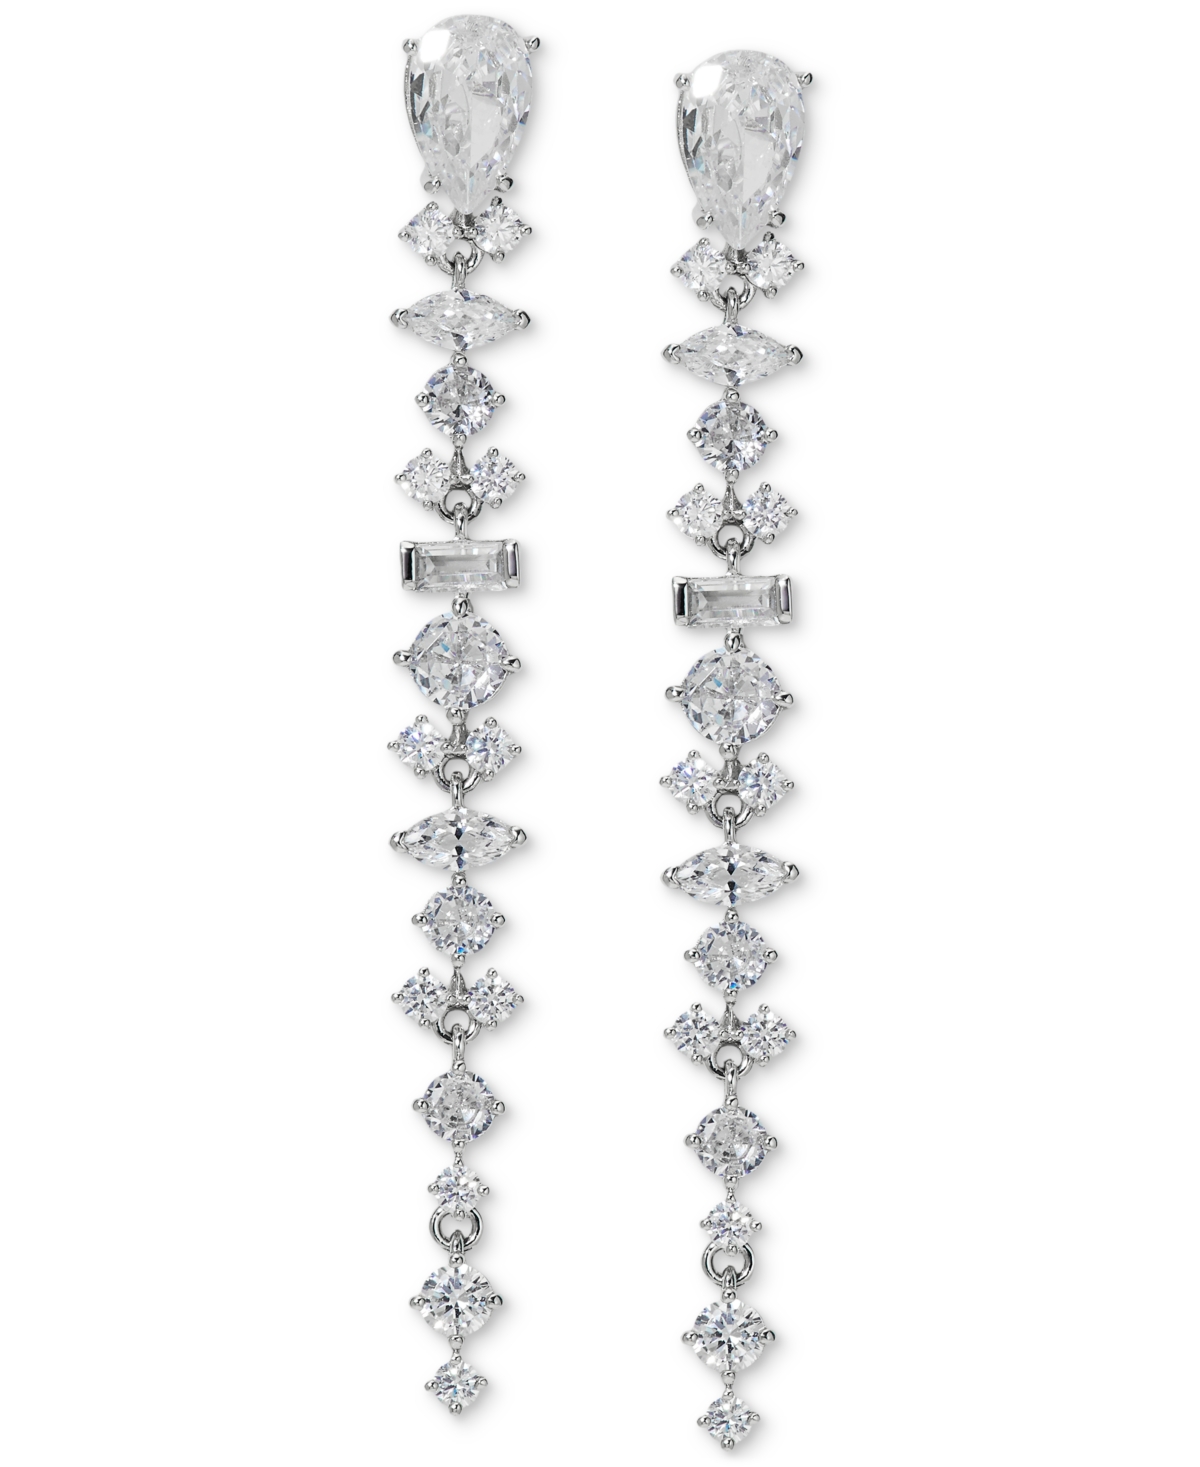 Silver-Tone Mixed Cubic Zirconia Linear Drop Earrings, Created for Macy's - Rhodium